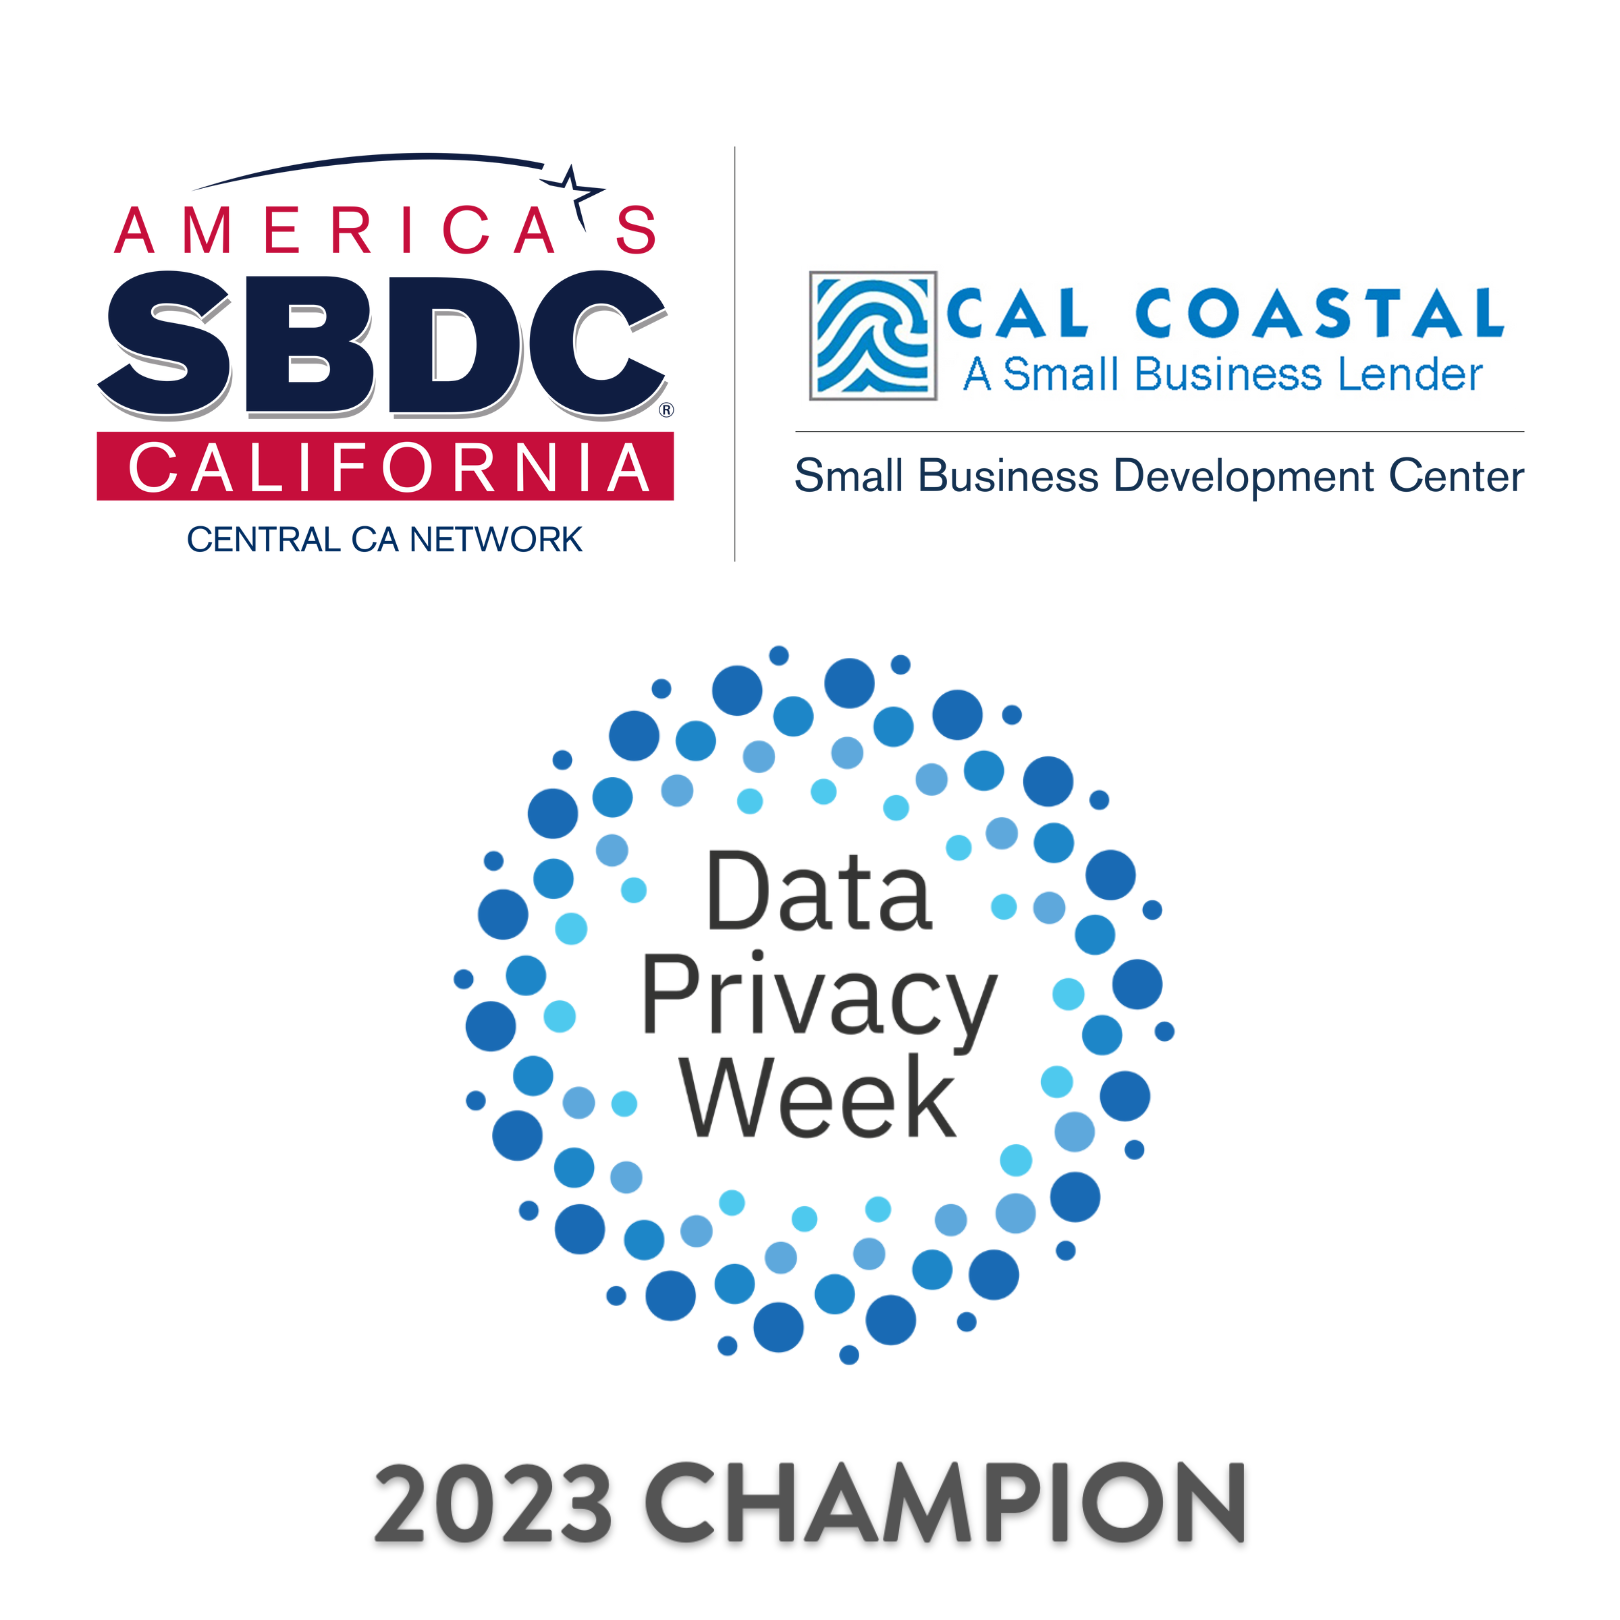 Cal Coastal SBDC and Data Privacy Week logos with indication of 2023 Champion